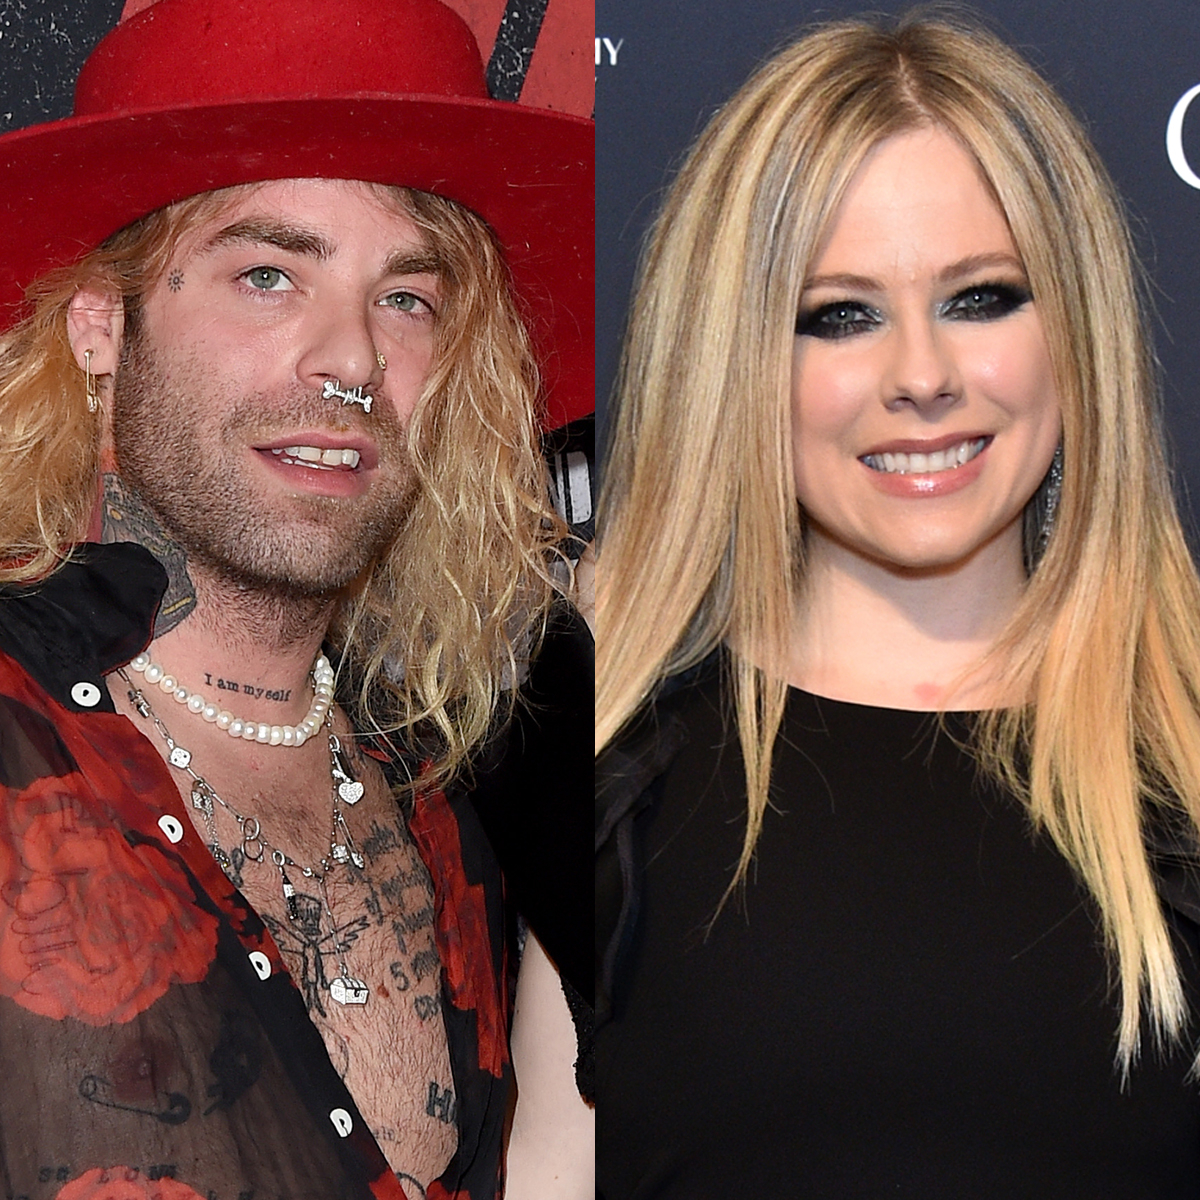 Avril Lavigne - Mod Sun has tattooed Avril Lavigne's name on his neck in dating  rumors-E!online - London News Time